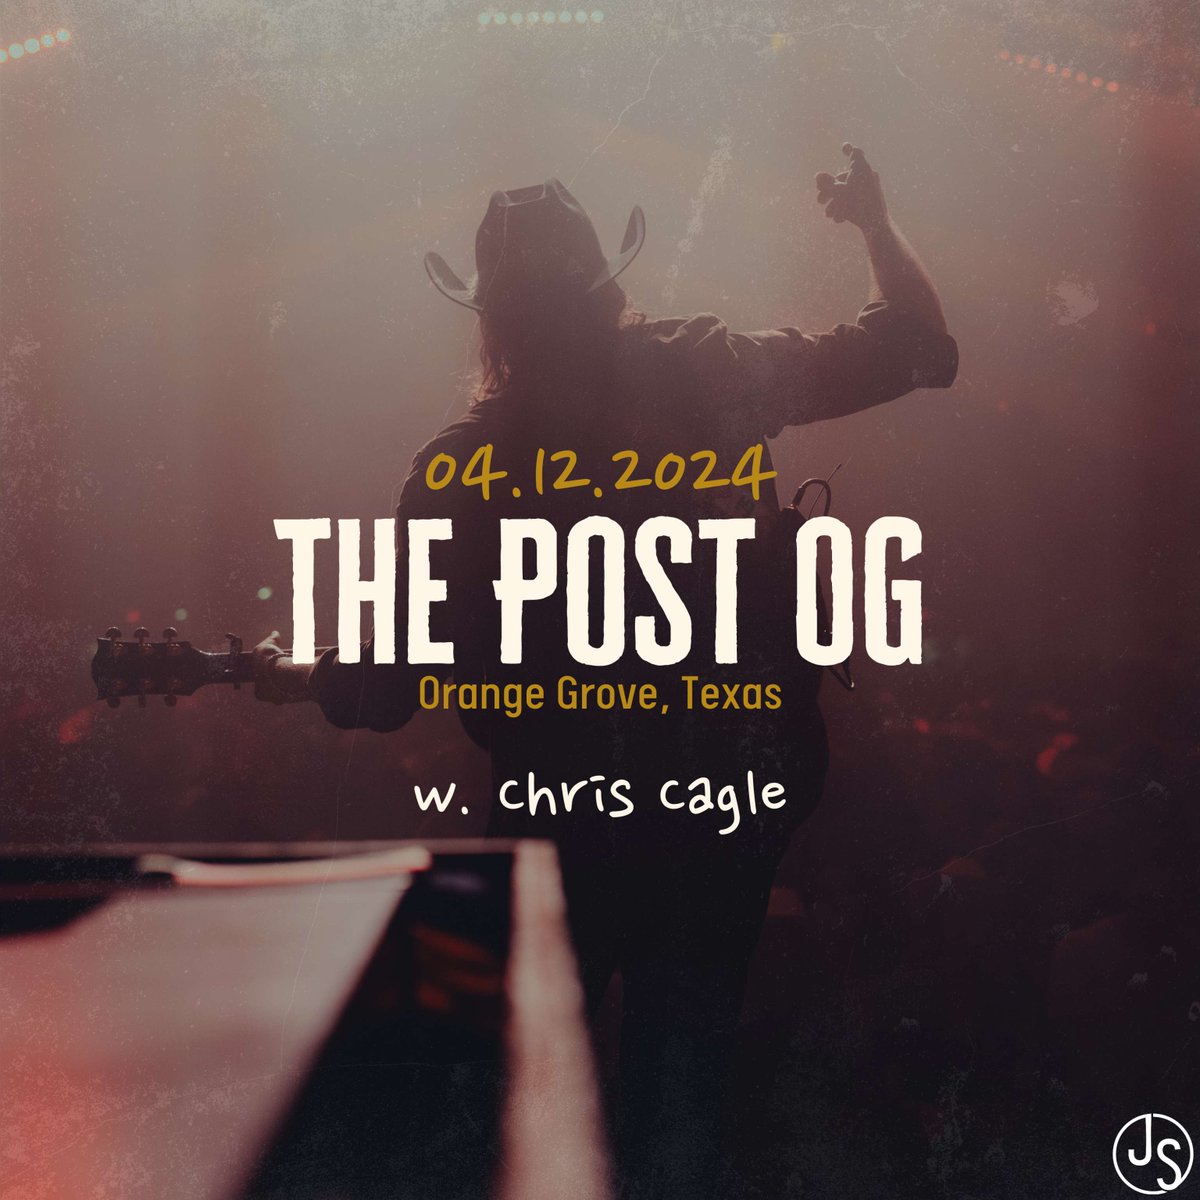 Chicks dig it! See y'all at The Post OG on 4.12 with none other than Mr. Chris Cagle. Snag your tickets here: etix.com/ticket/p/77151…